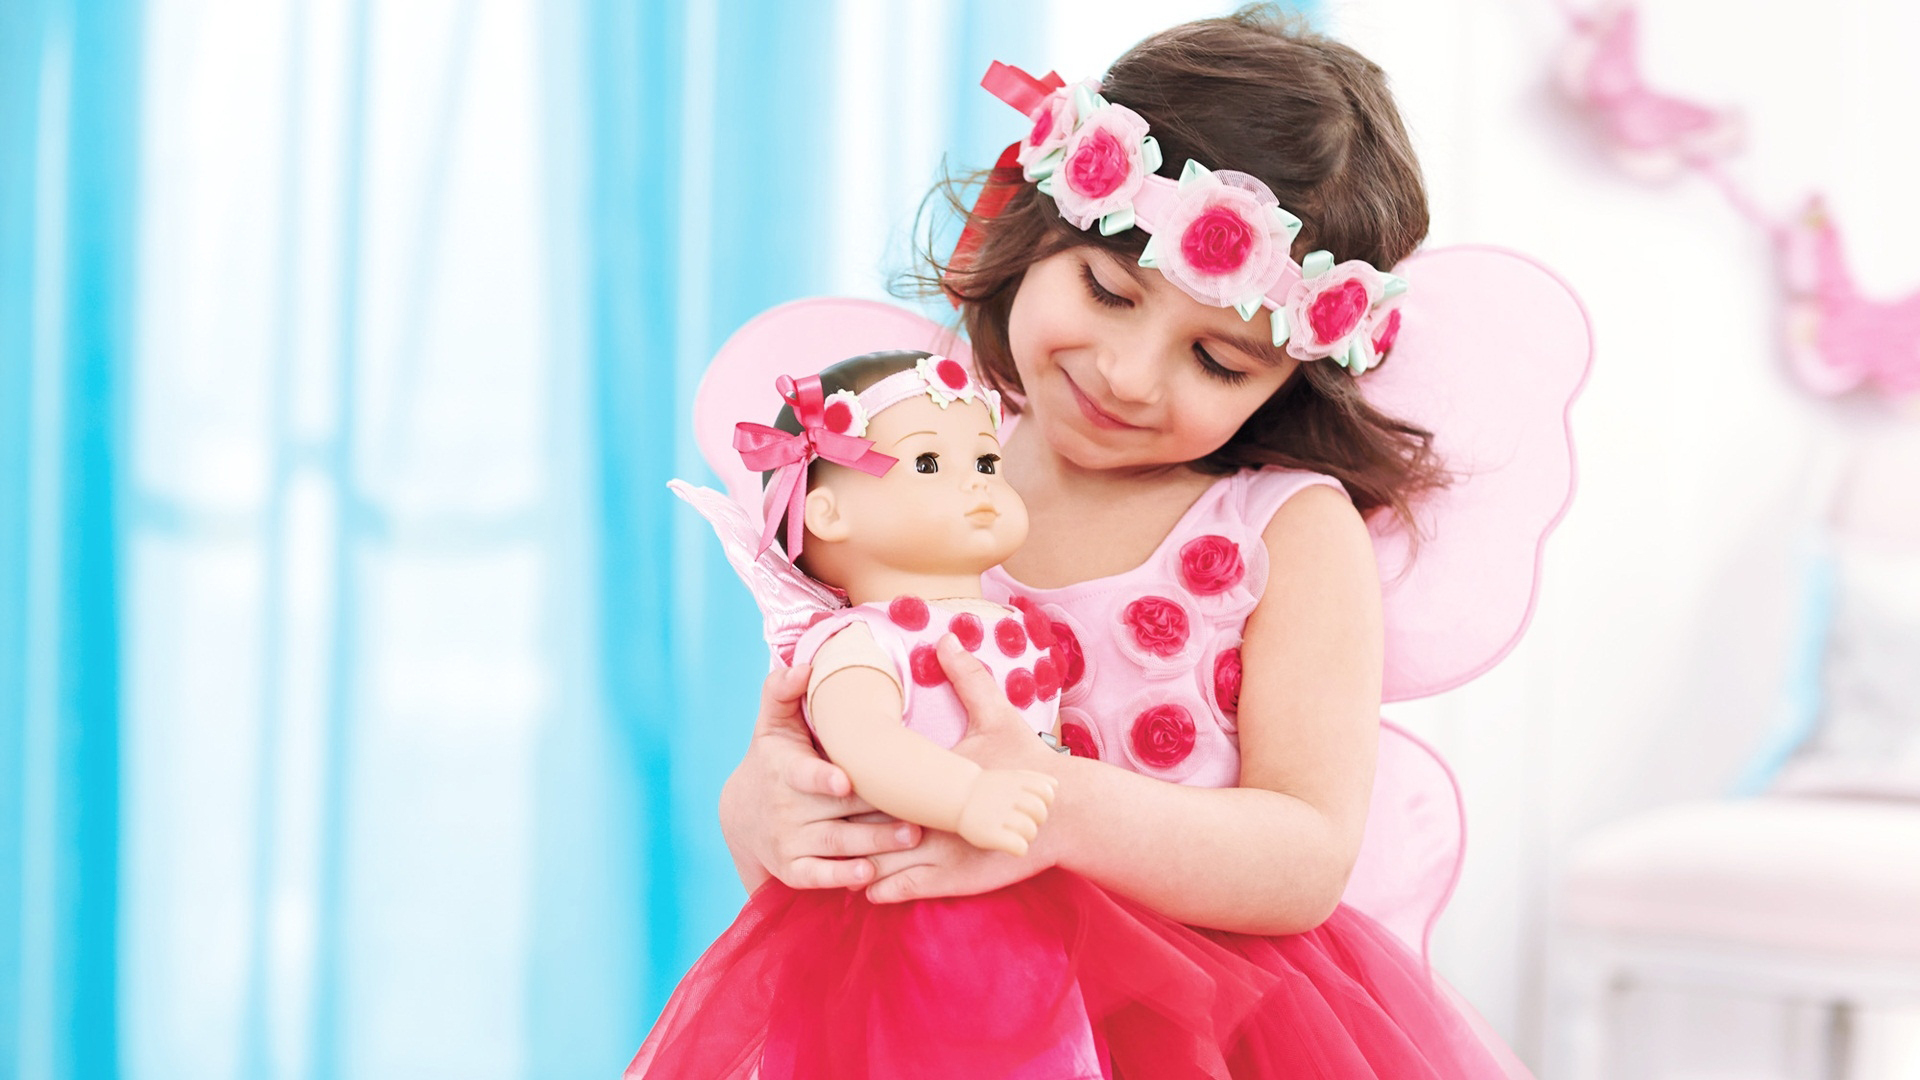 Little Girl With Wings Is Wearing Pink Flowers Dress And Headband Holding Doll With Hands HD